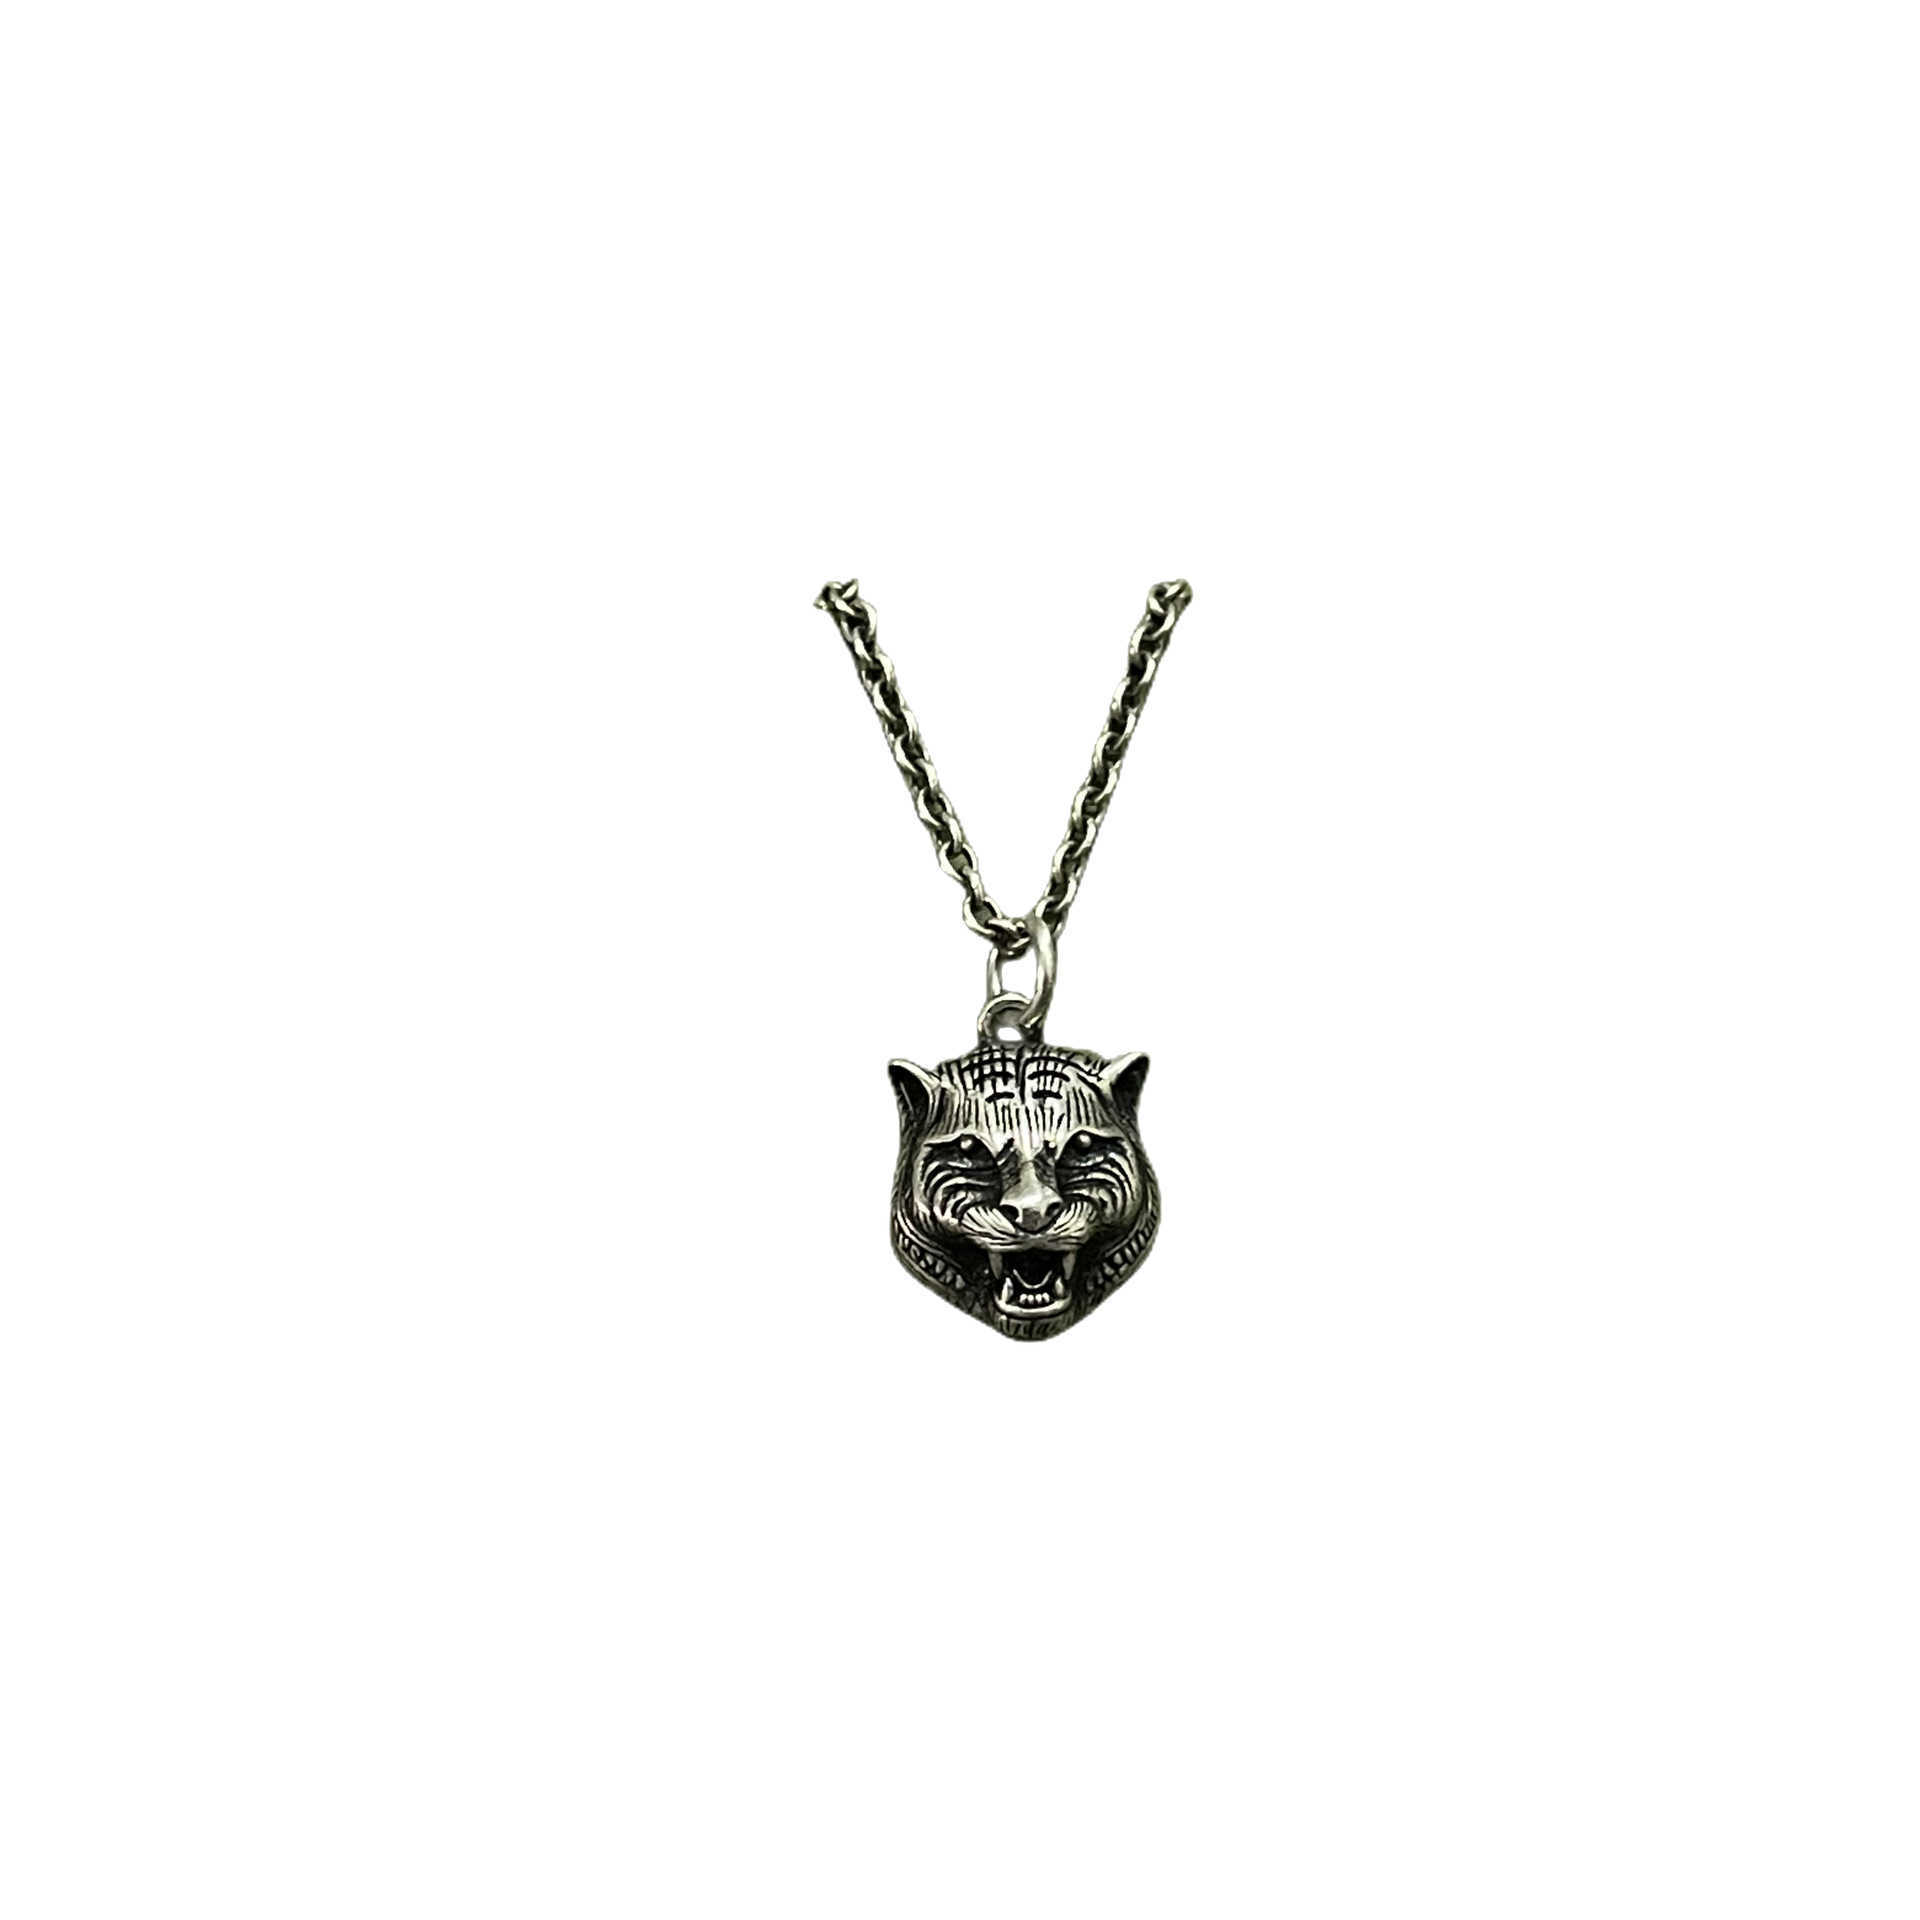 95% OFF 2023 New Luxury High Quality Fashion Jewelry for sterling silver necklace made of old tiger head